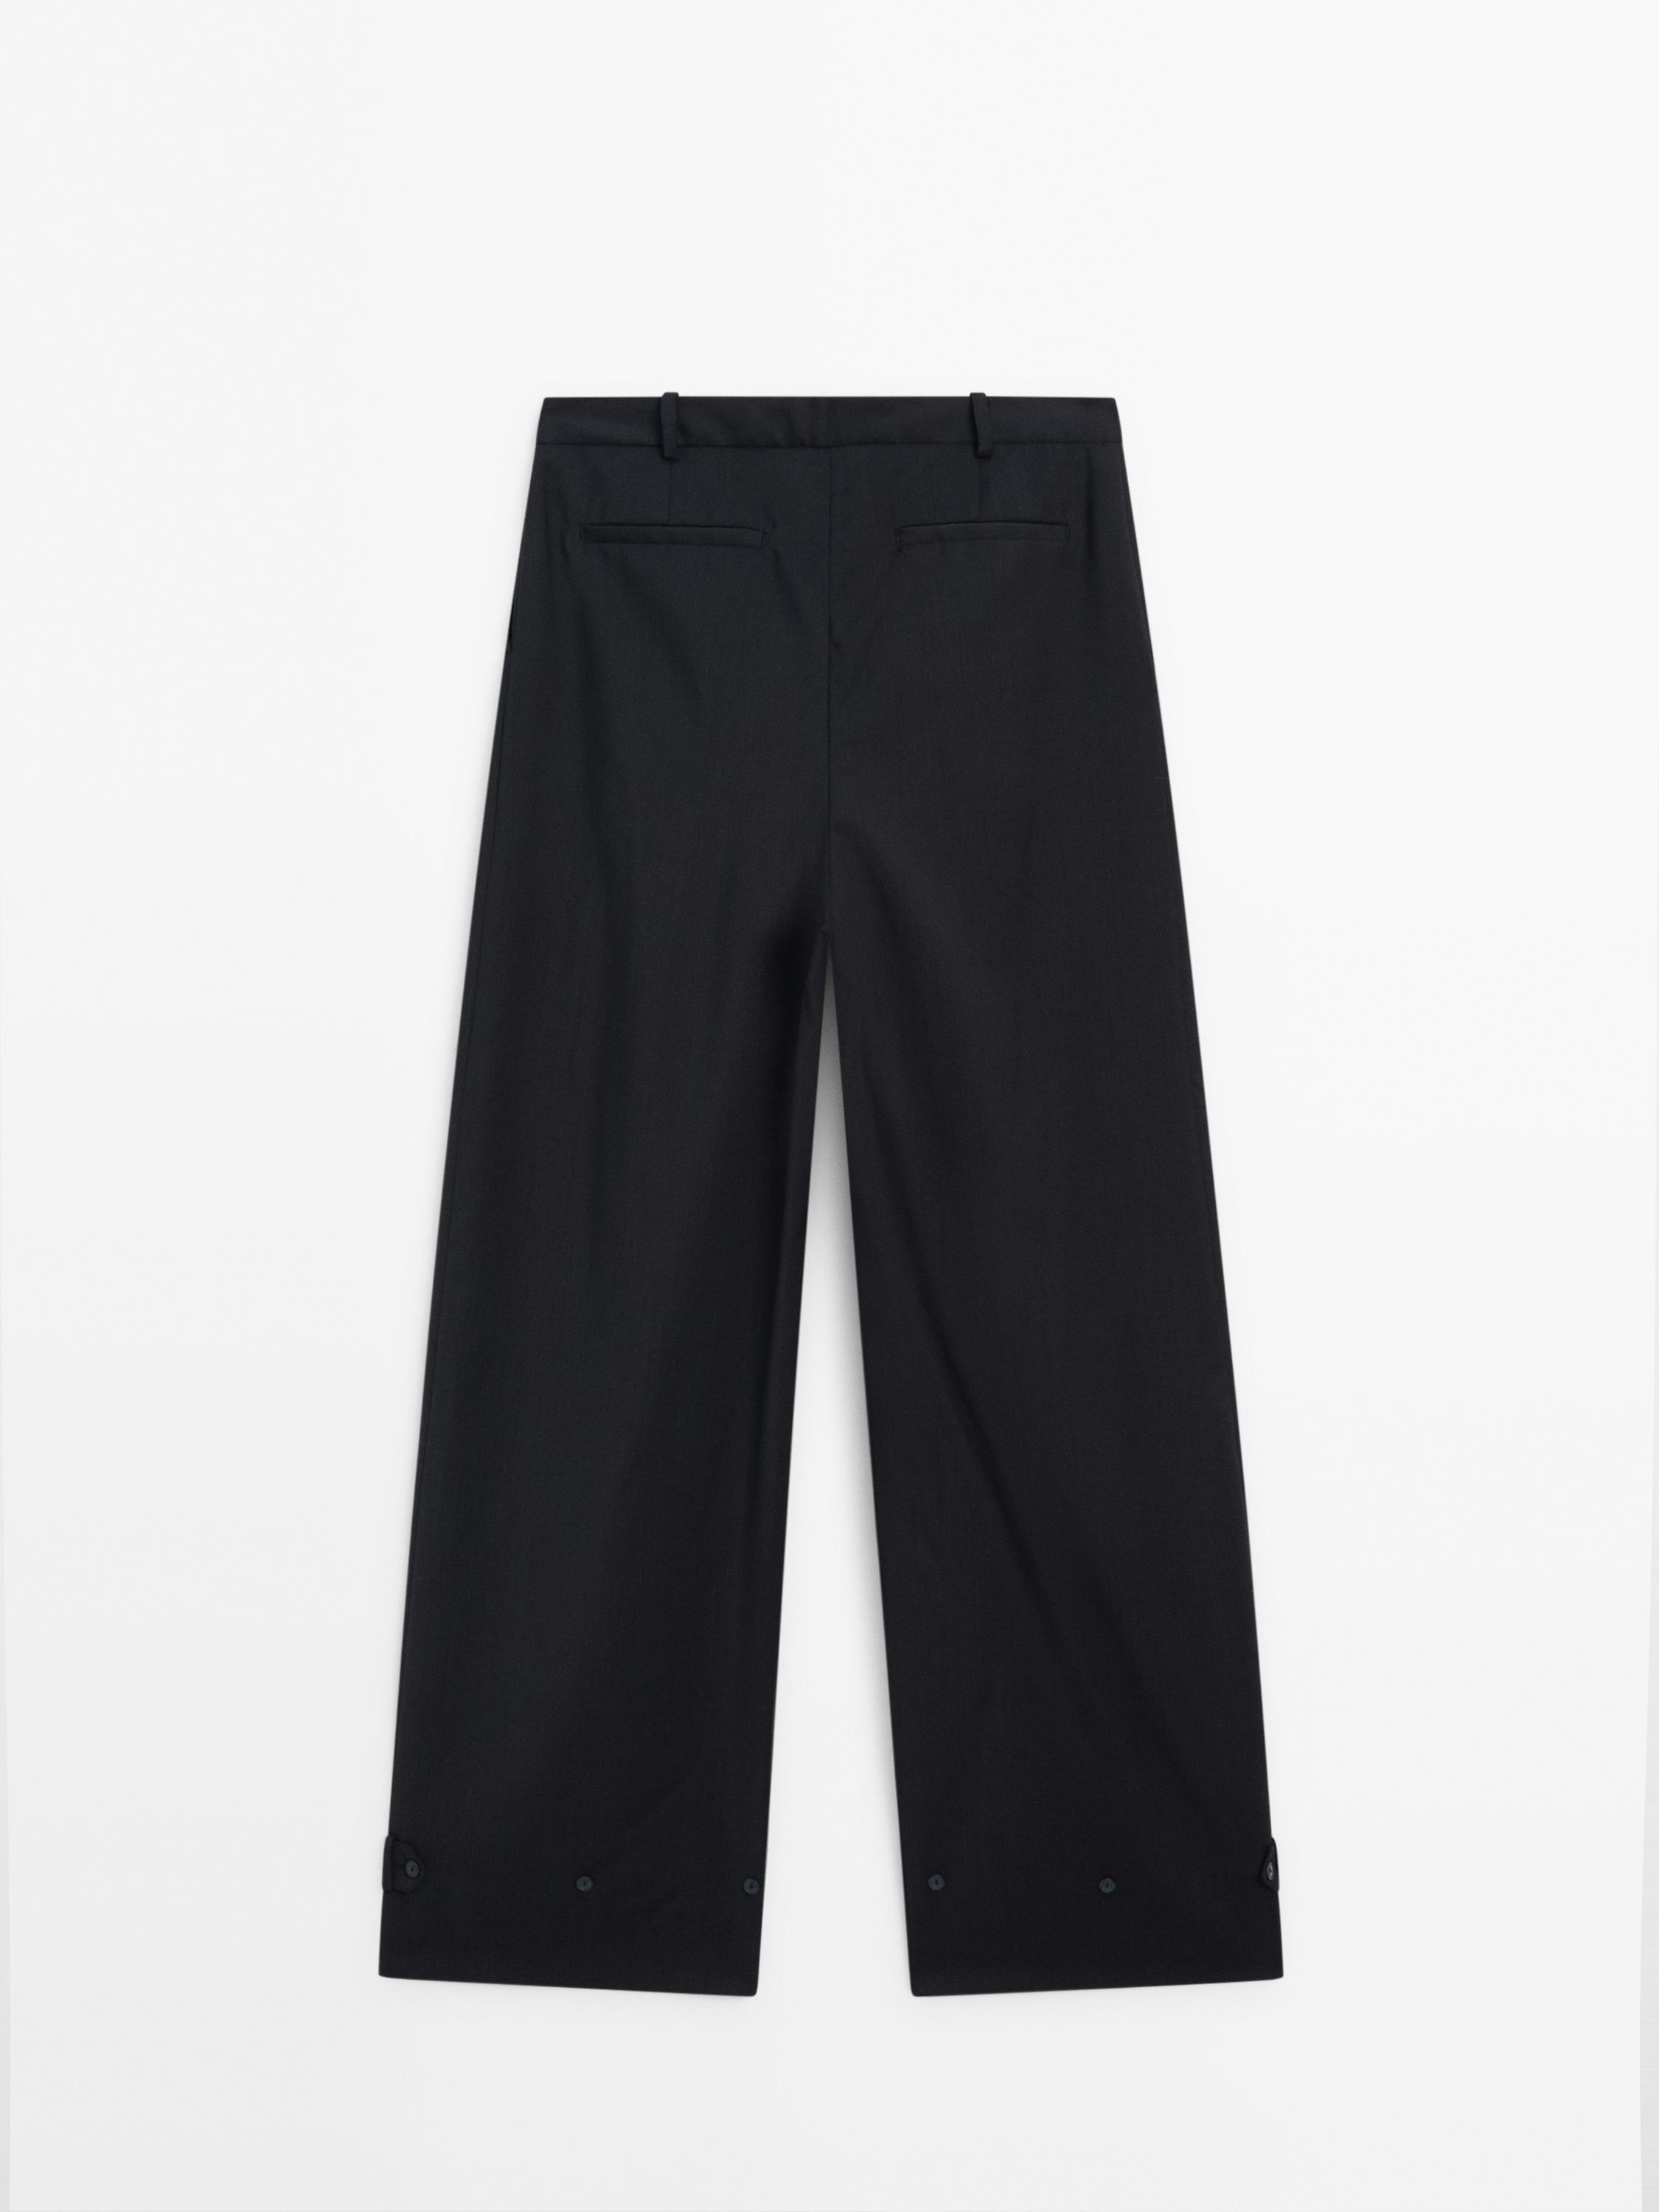 Darted trousers with adjustable hems - Studio